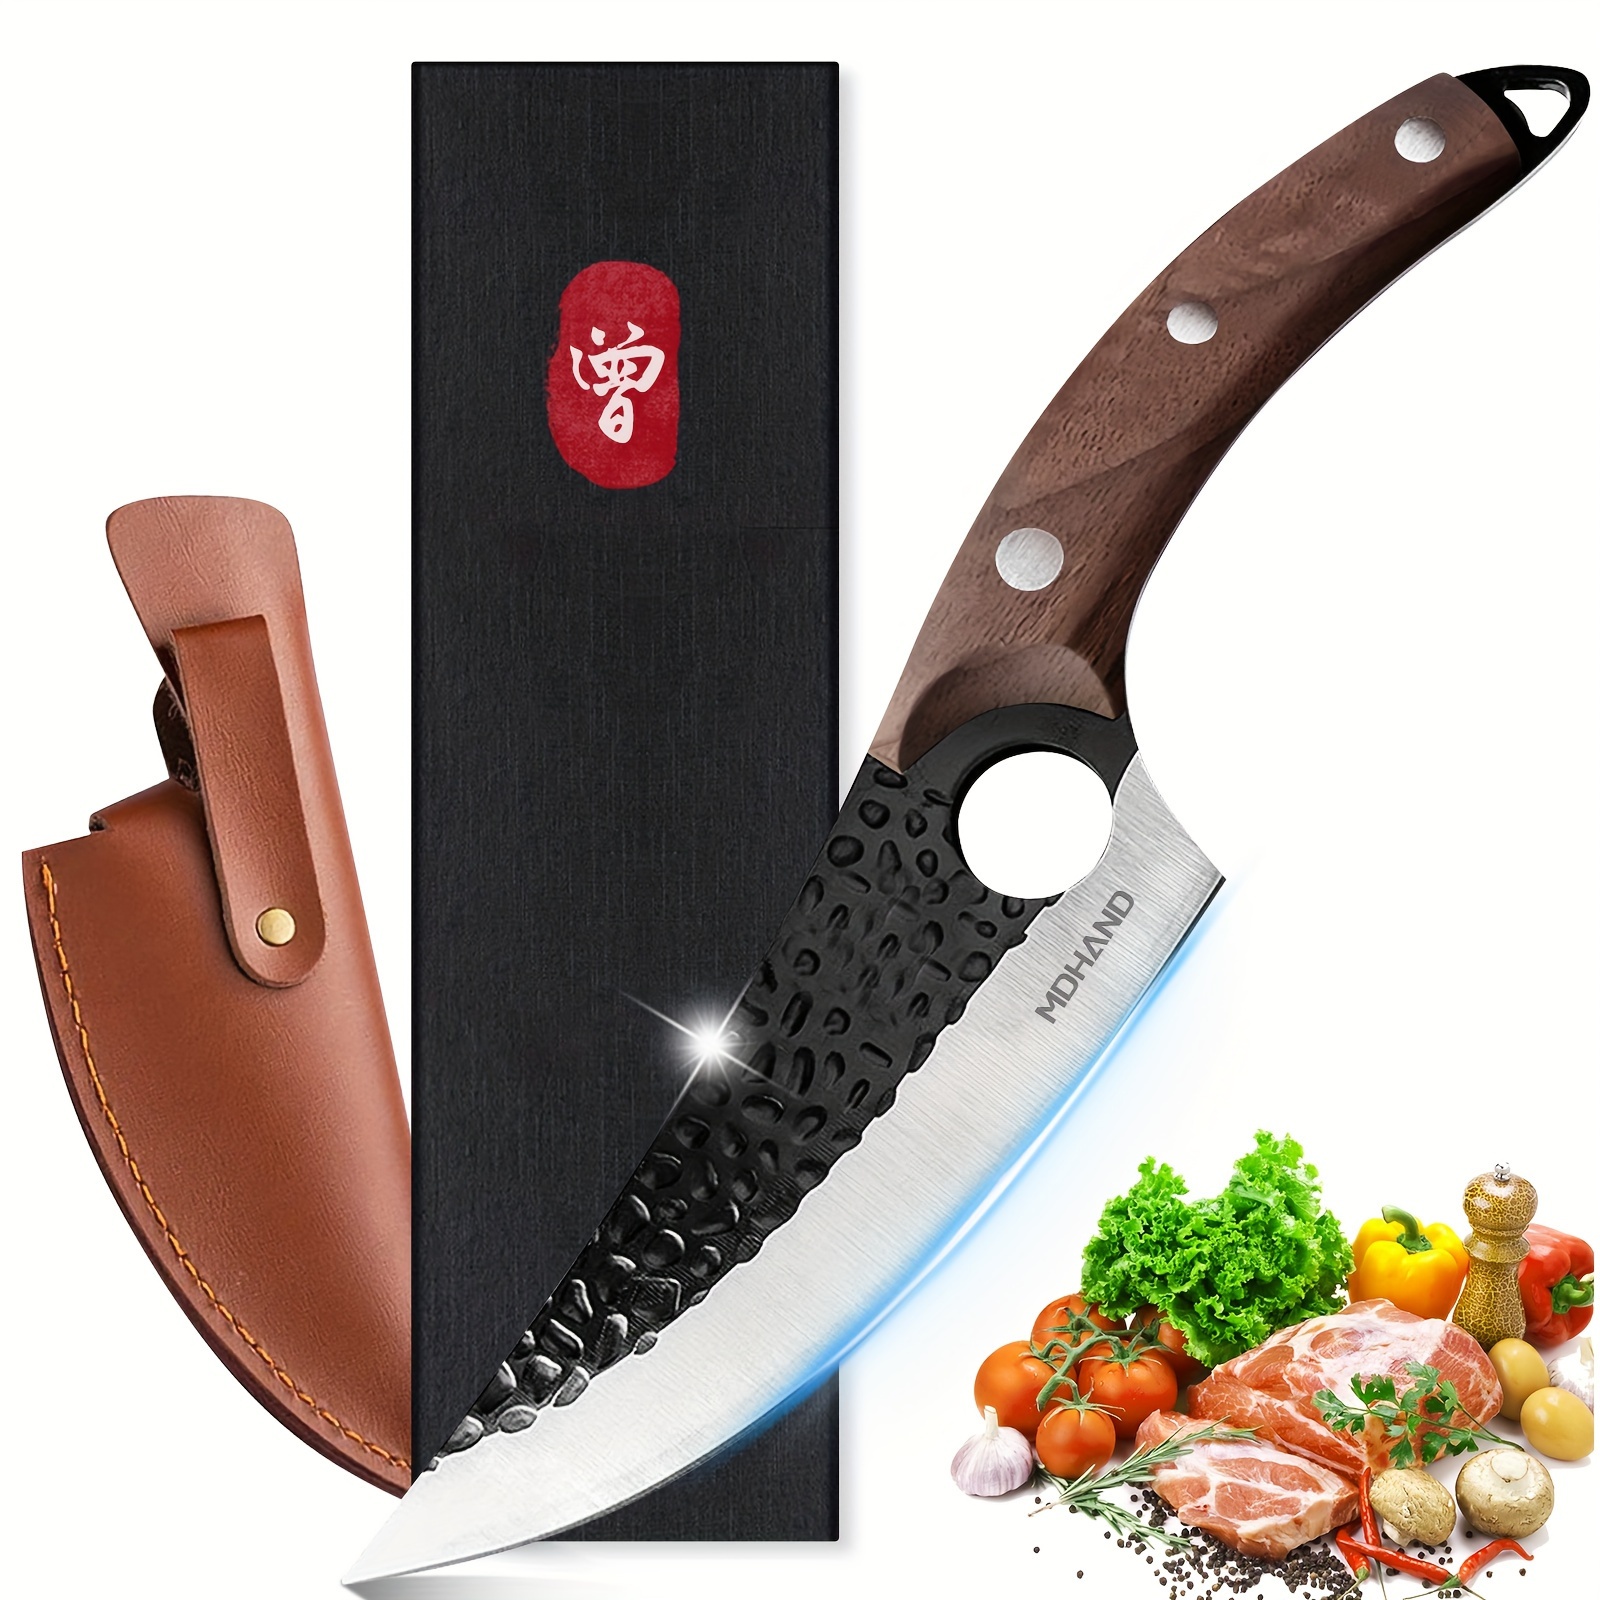 

Mdhand Meat Cleaver Knife 6inch, Hand Forged Boning Knife With Sheath Butcher Knives High Carbon Steel Fillet Knife Vegetable Chef Knives For Kitchen, Camping, Bbq, Outdoor